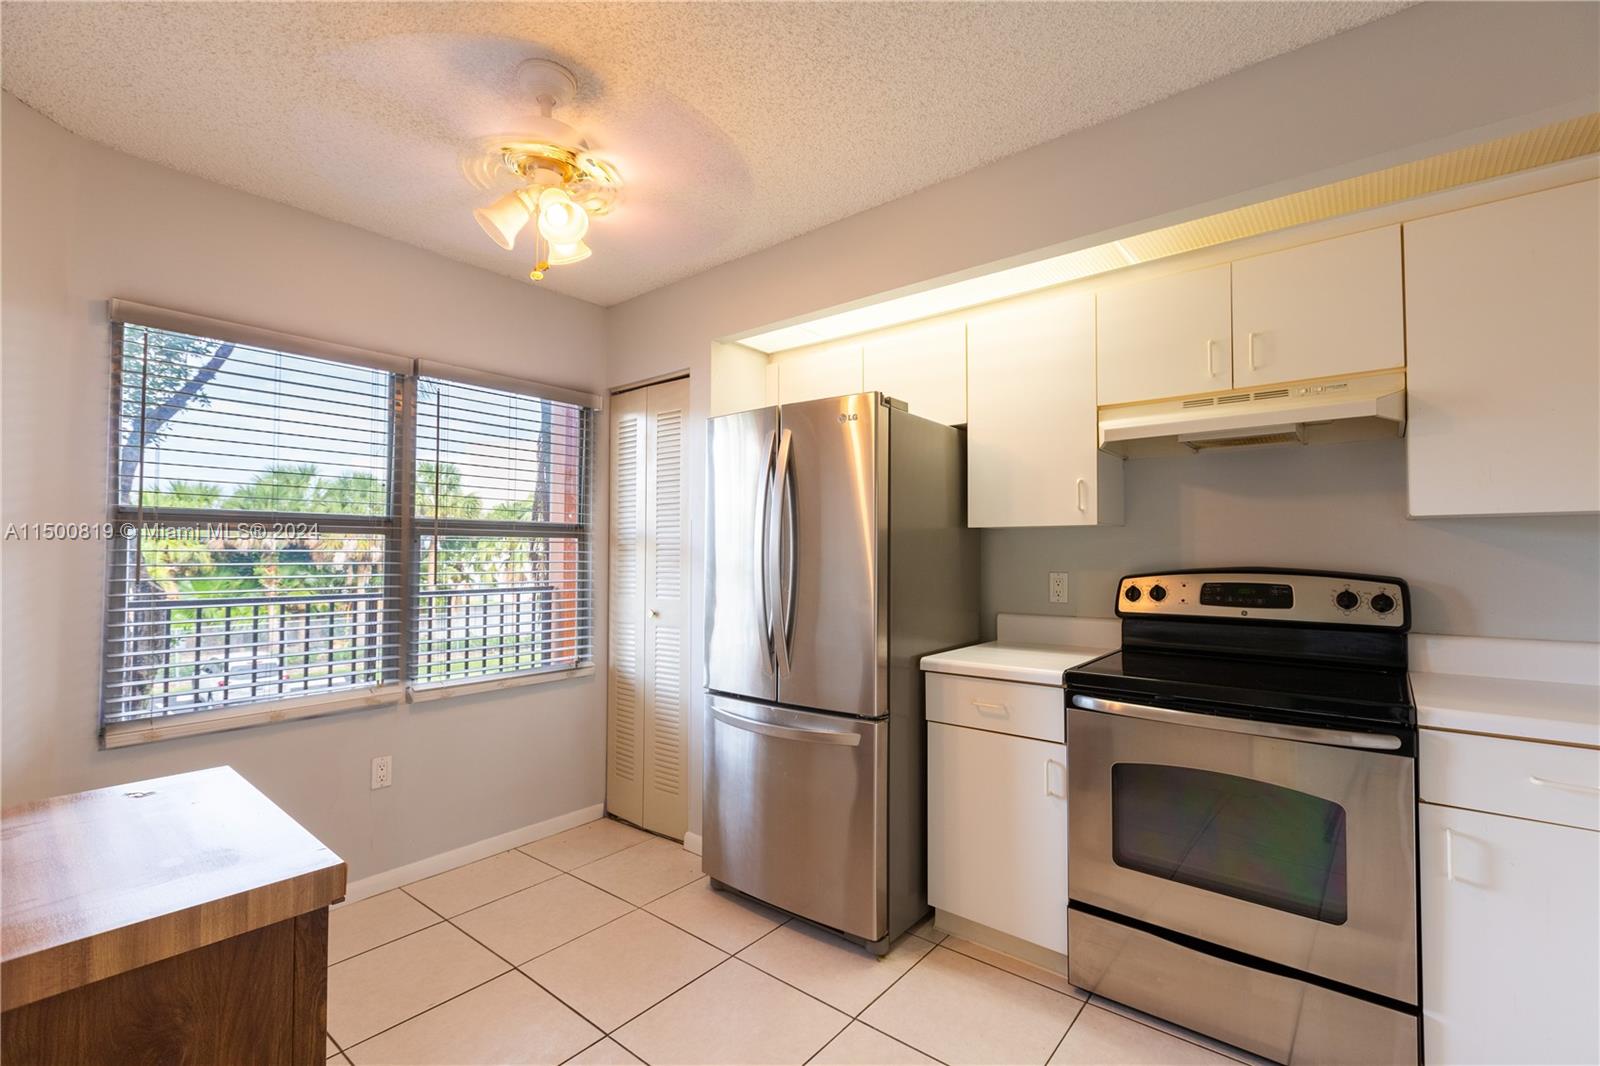 571 SW 142nd Ave 209O, Pembroke Pines, Florida 33027, 2 Bedrooms Bedrooms, ,2 BathroomsBathrooms,Residential,For Sale,571 SW 142nd Ave 209O,A11500819